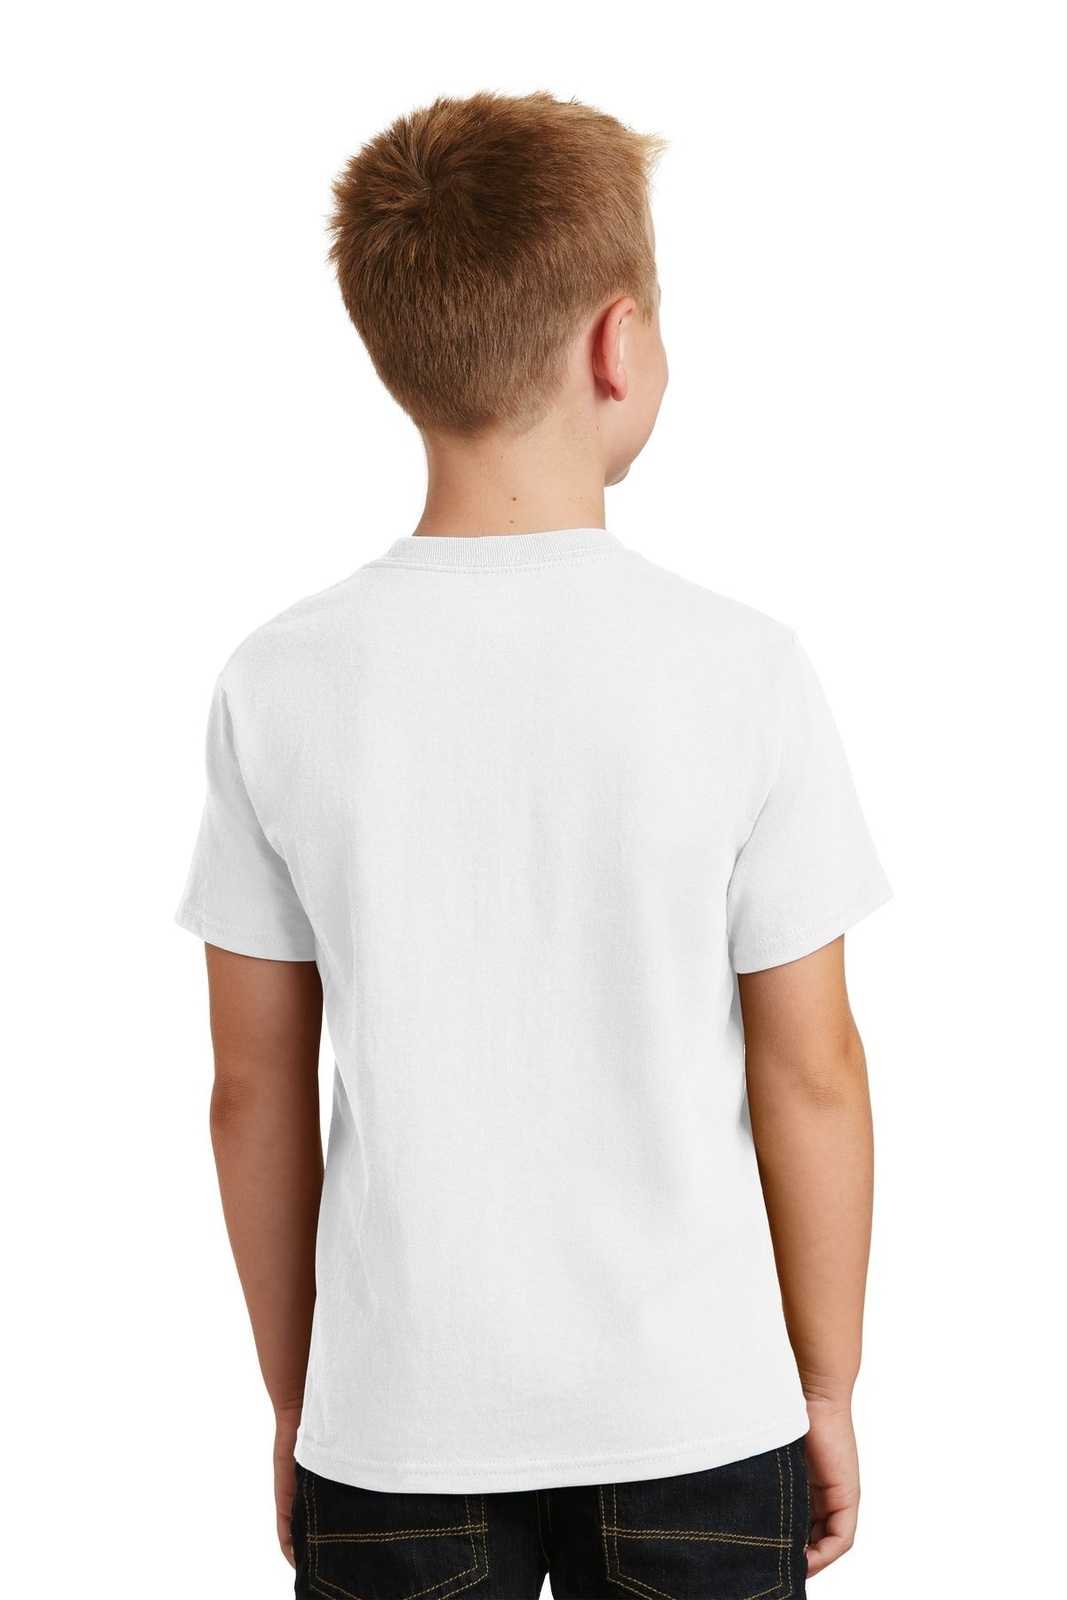 Port & Company PC54Y Youth Core Cotton Tee - White - HIT a Double - 1